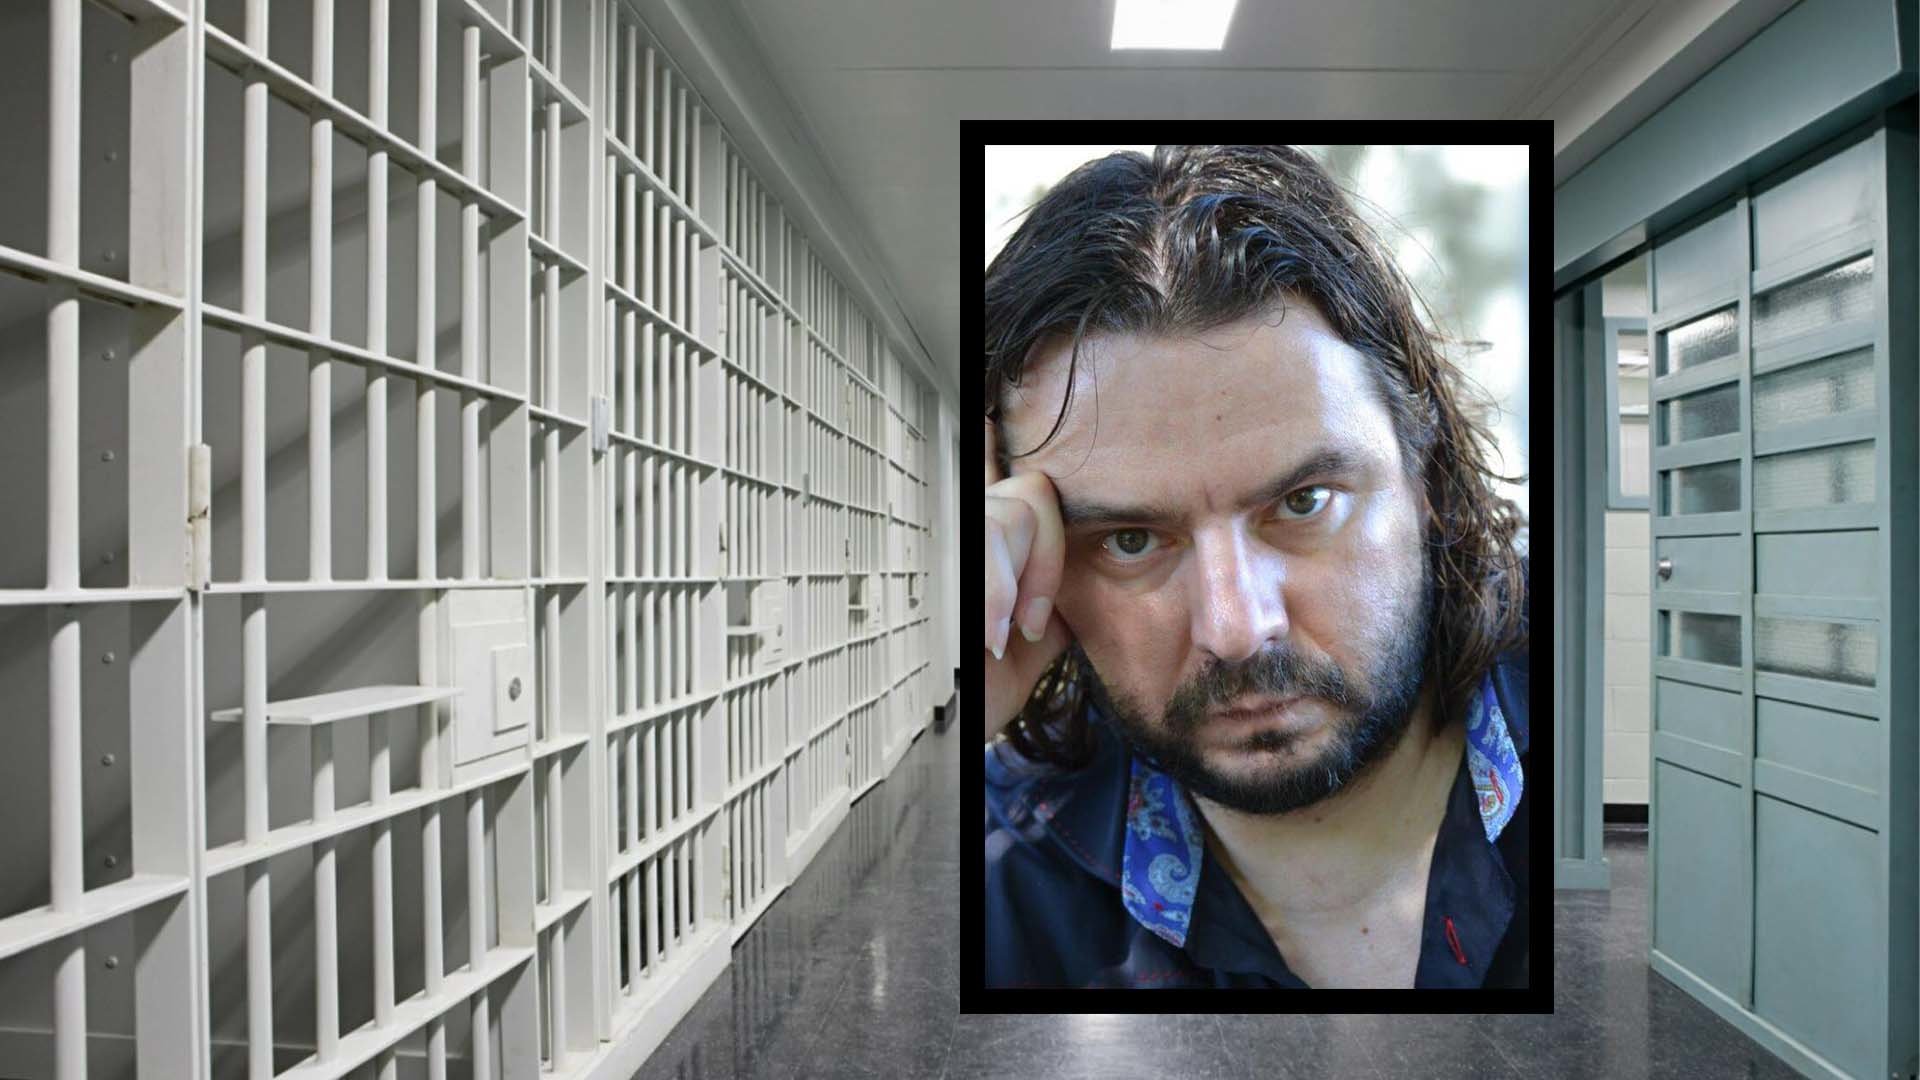 A federal jury on Monday, July 18, 2022, convicted Gueorgui Hristov Pantchev, 50, on four counts of stalking female physicians at the West Los Angeles Veterans Affairs Medical Center and the VA’s Loma Linda facility in San Bernardino County. Composite by Coffee or Die Magazine.